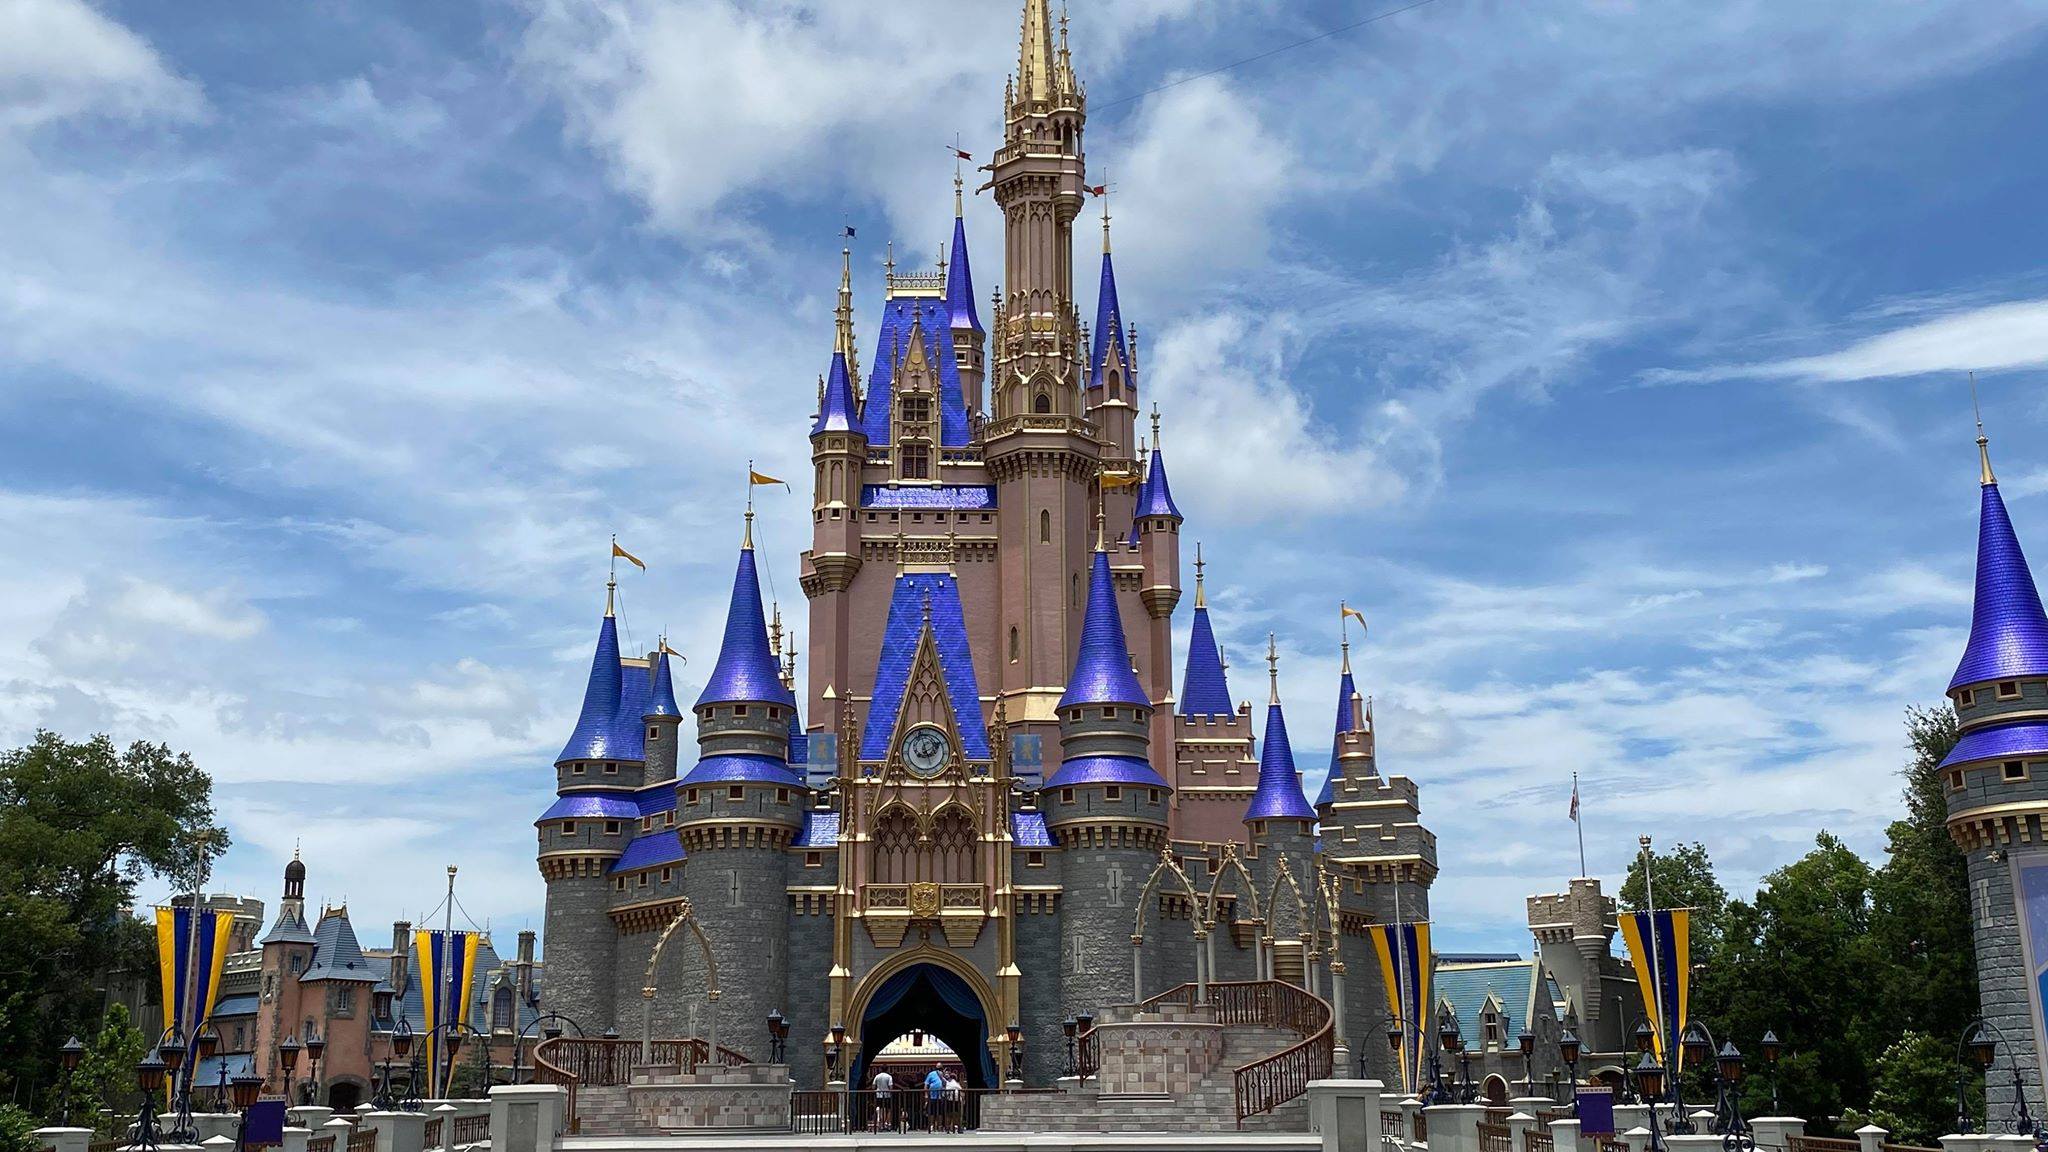 No new Covid cases linked to the Disney World theme parks according to Mayor Demings